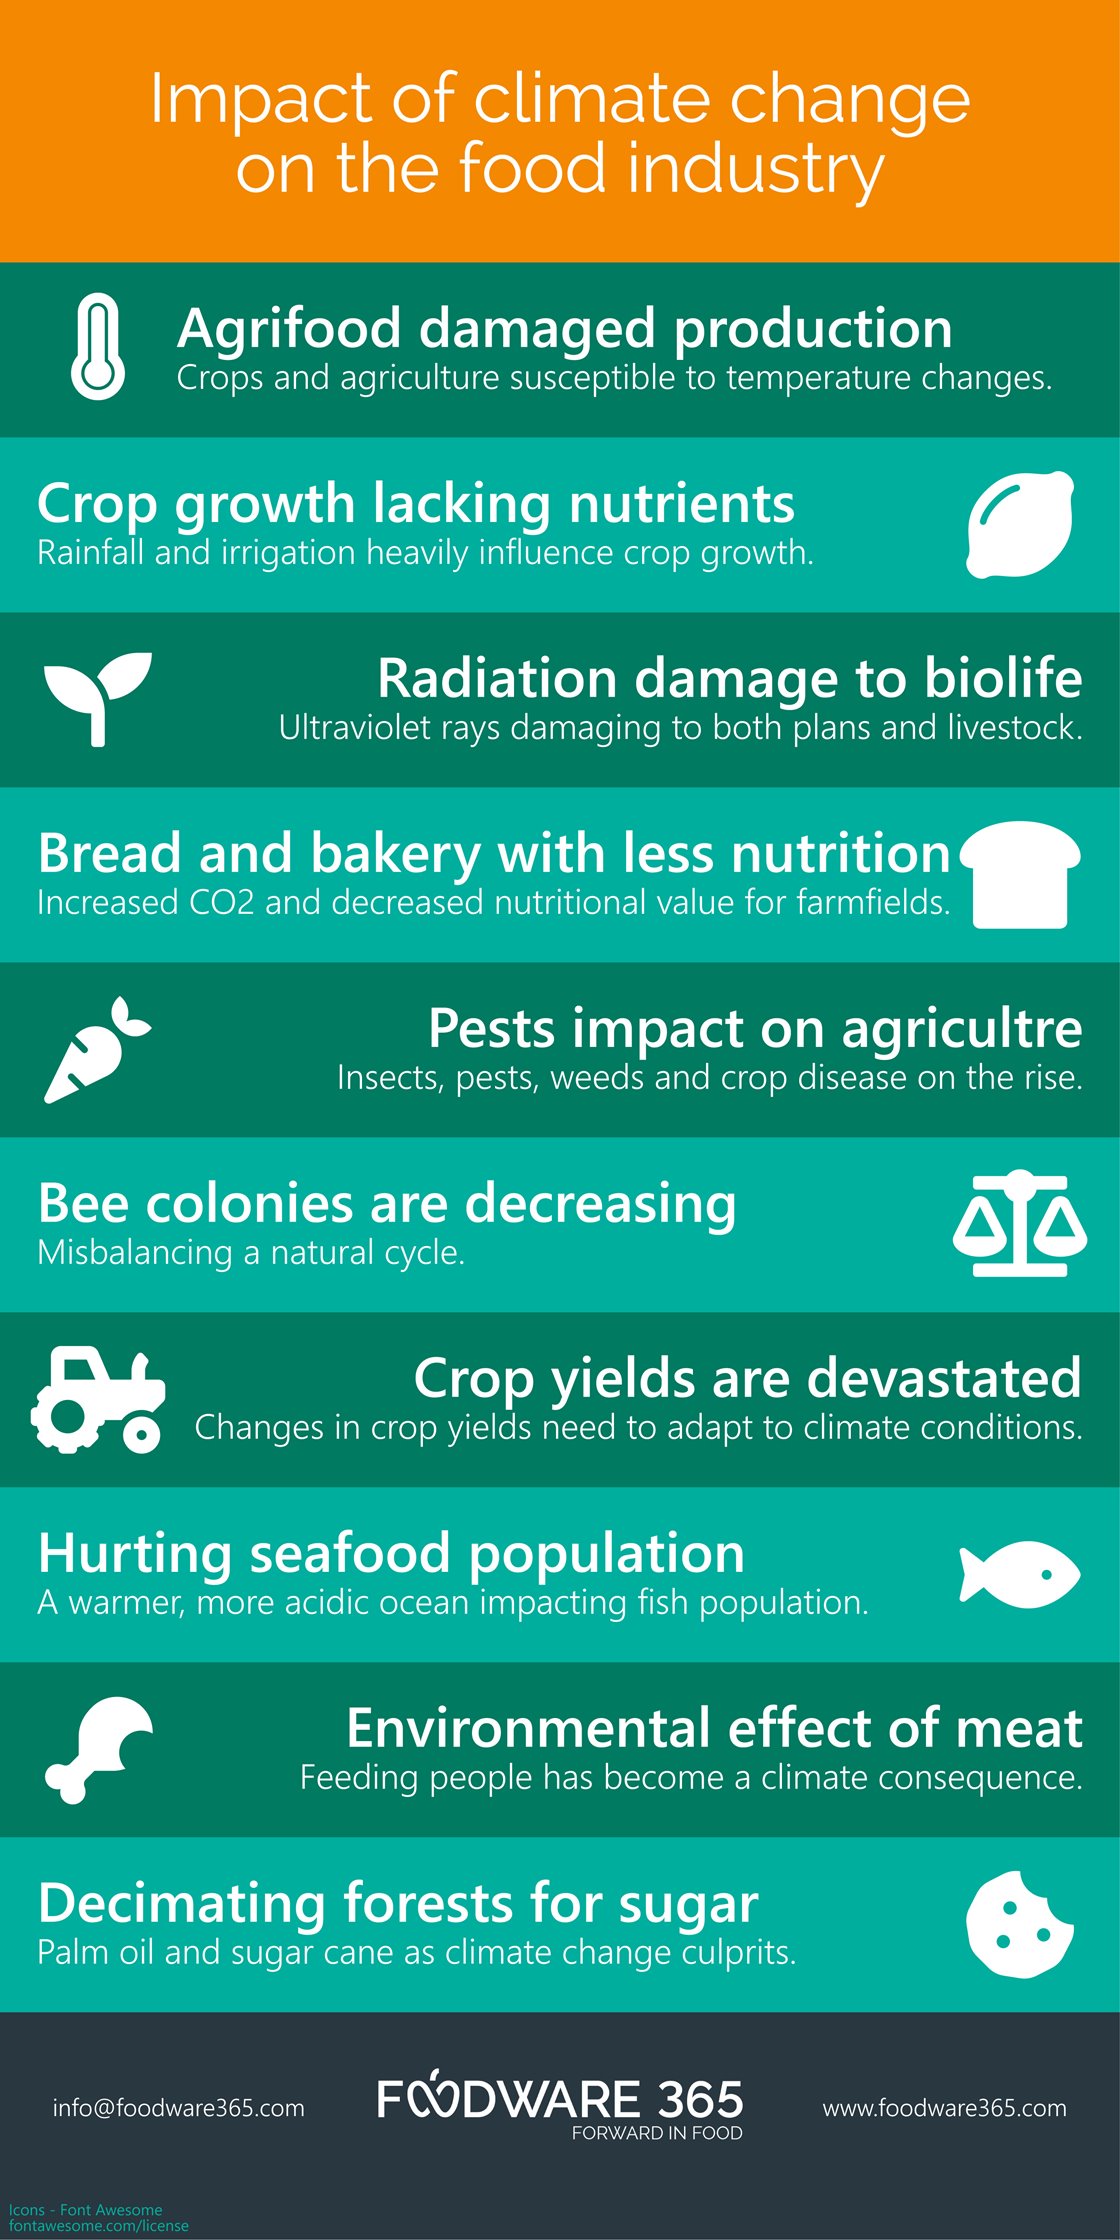 effects of global warming on agriculture and food supply